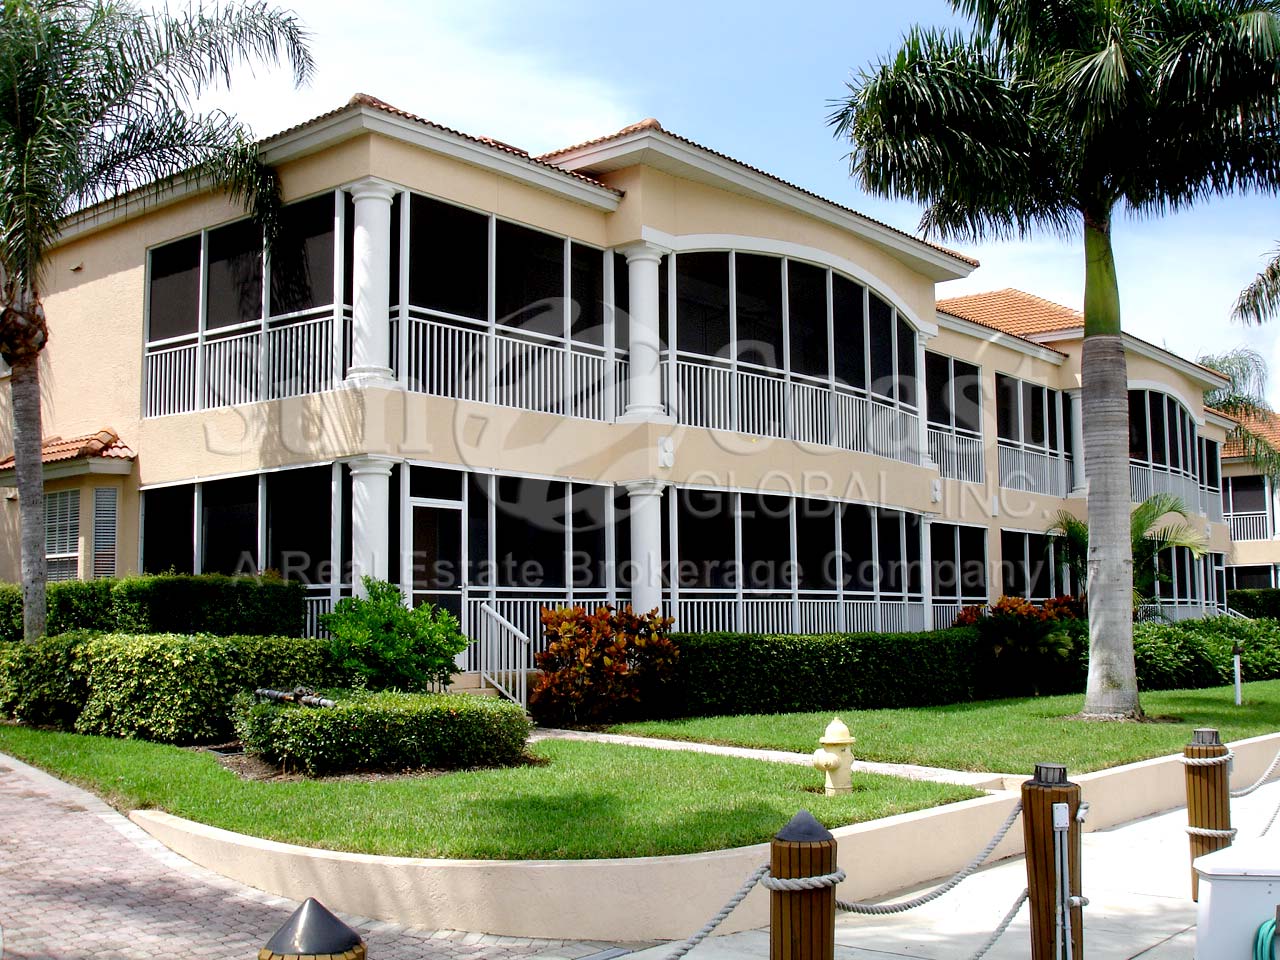 Yacht Harbour Cove are 4-unit condos on the water with 2 car garages and tile roofs.